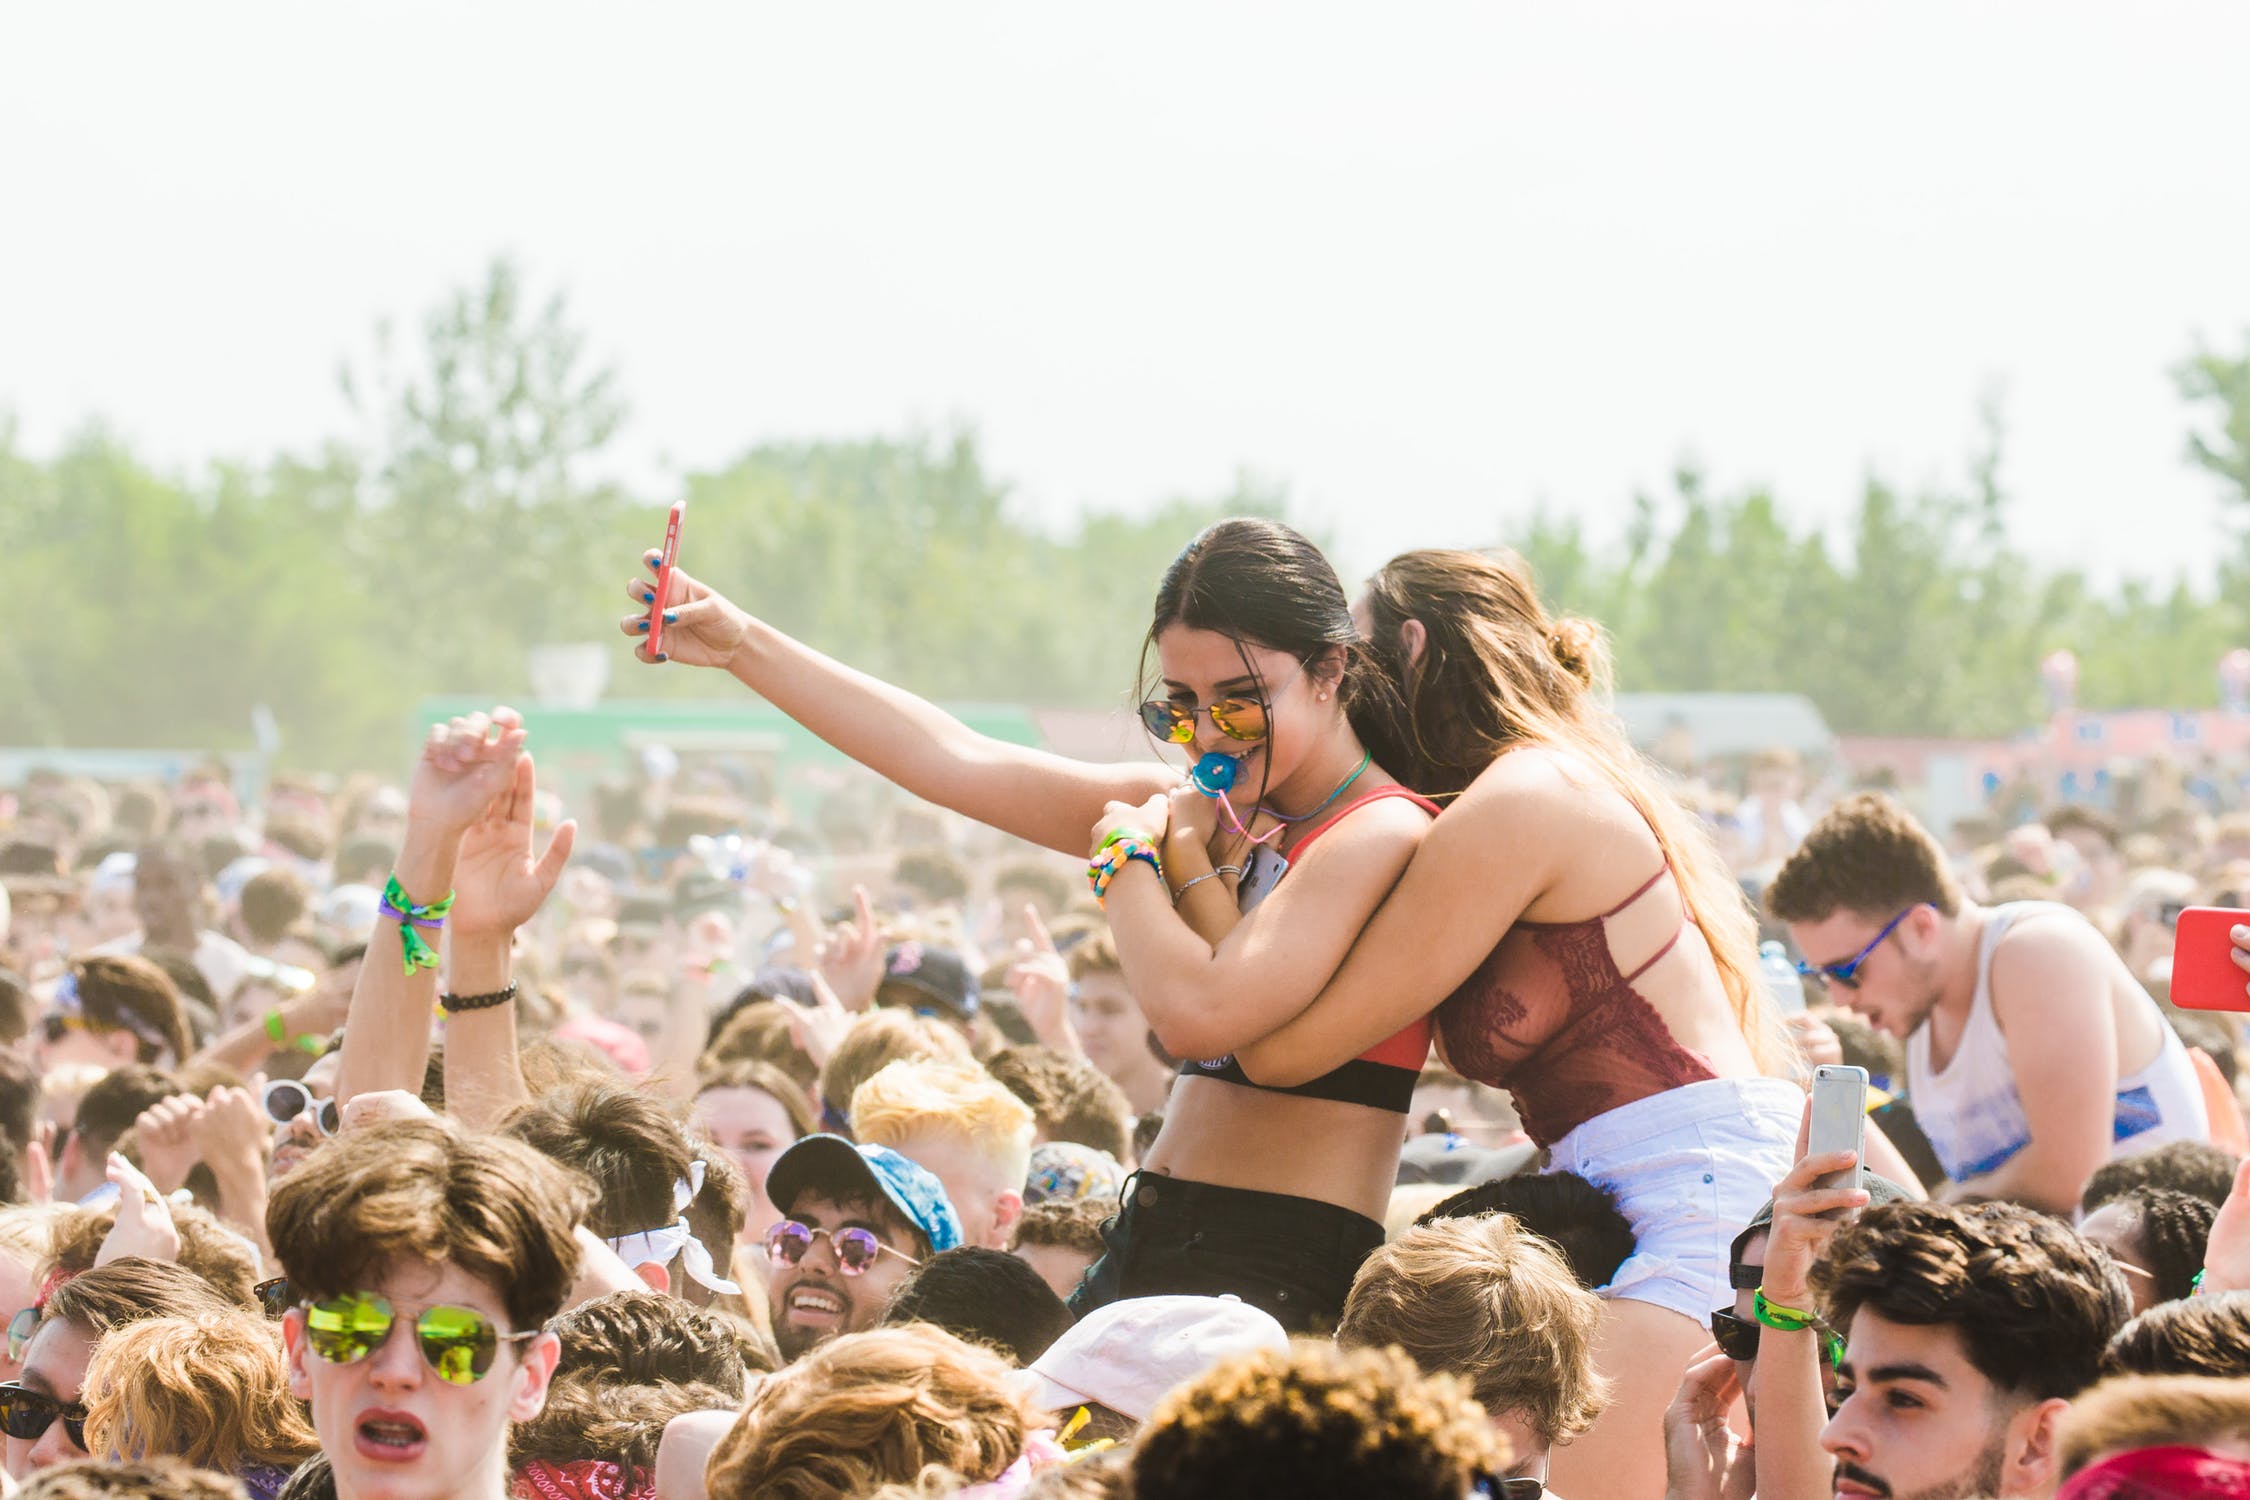 Why You Should Plan to Attend a Music Festival with Friends at Least Once